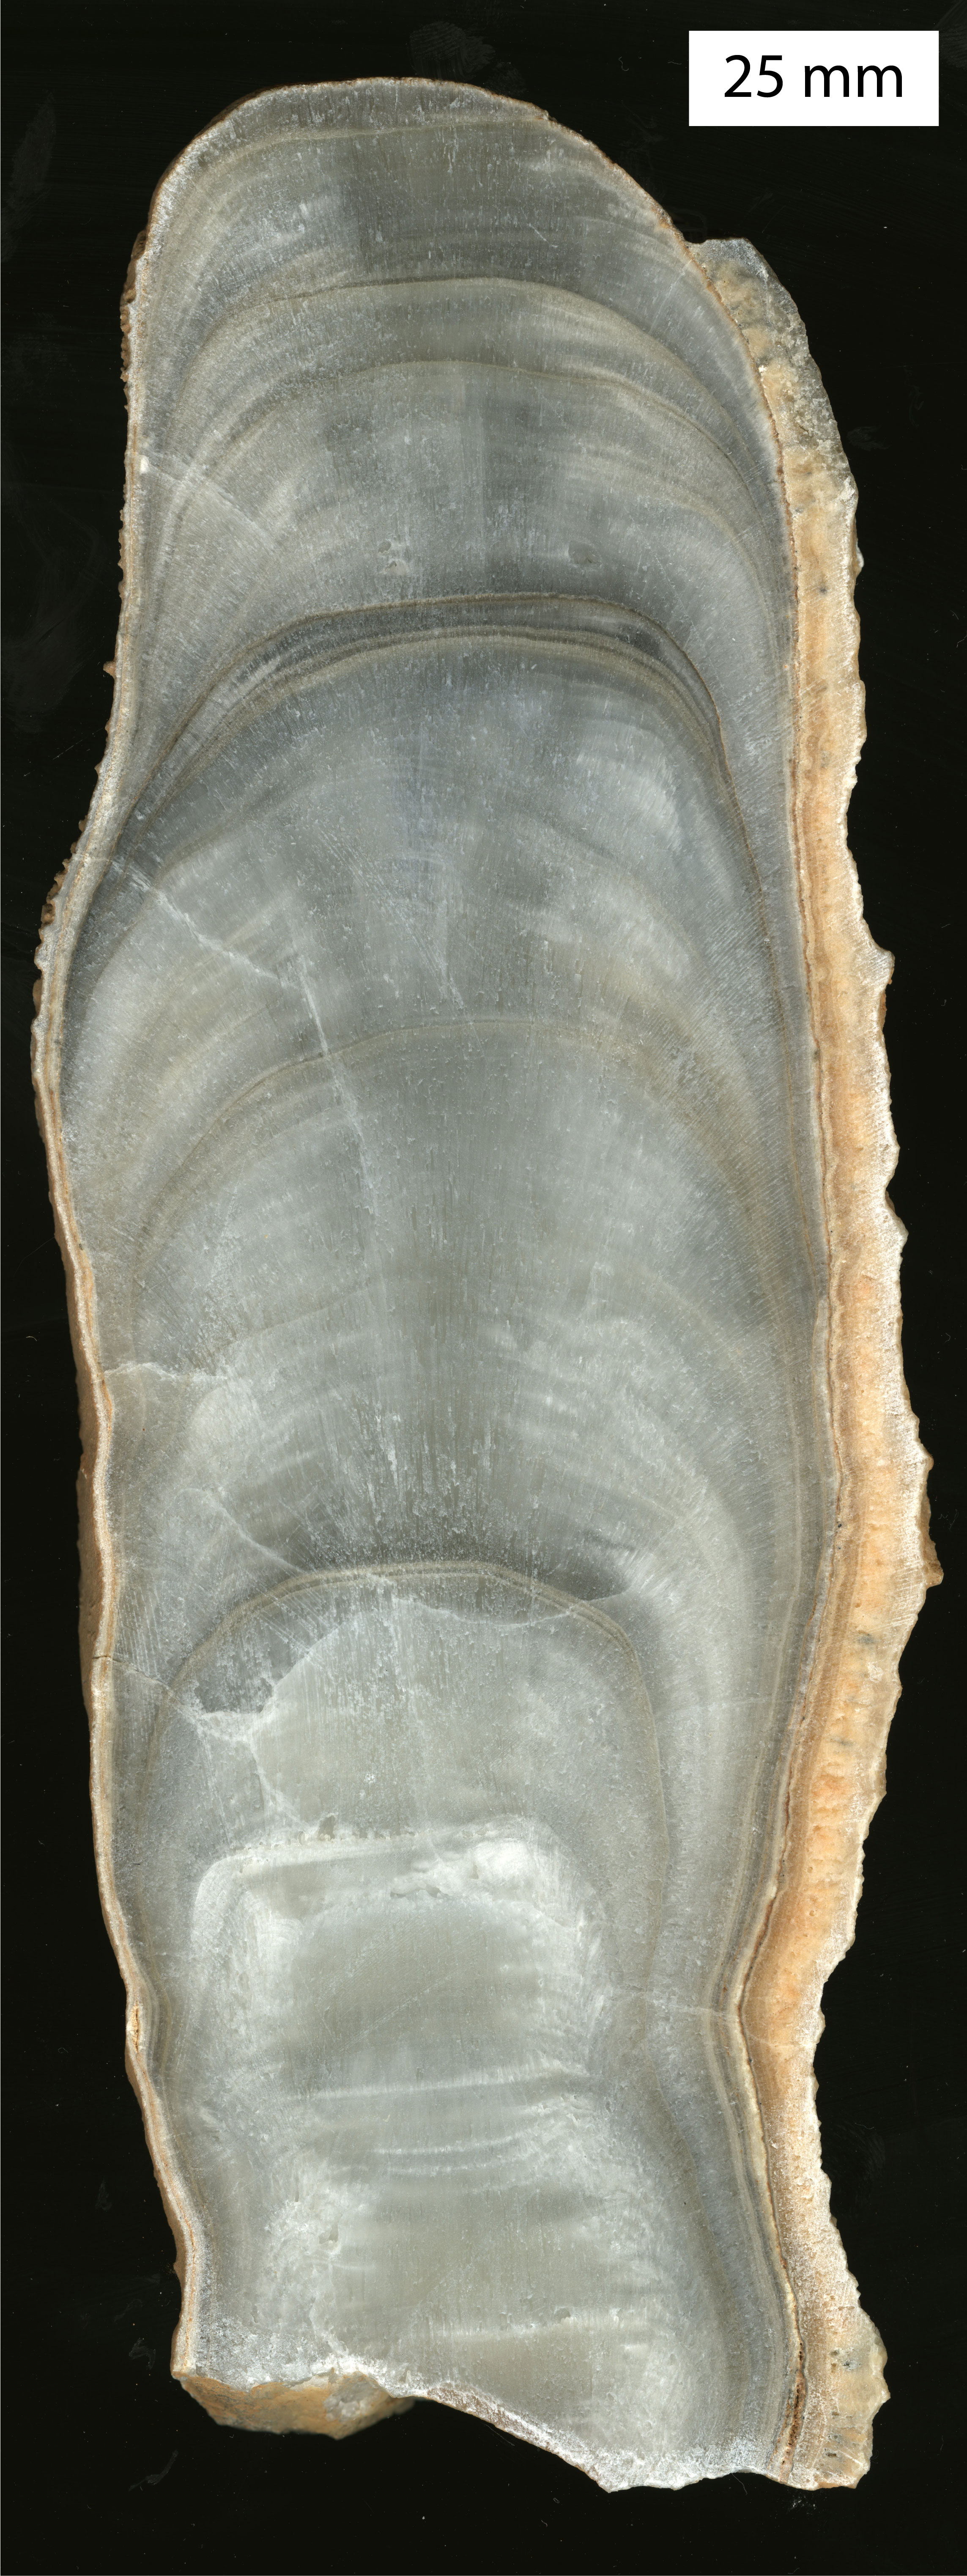 [Figure 1]: An example of a cross section of a stalagmite.